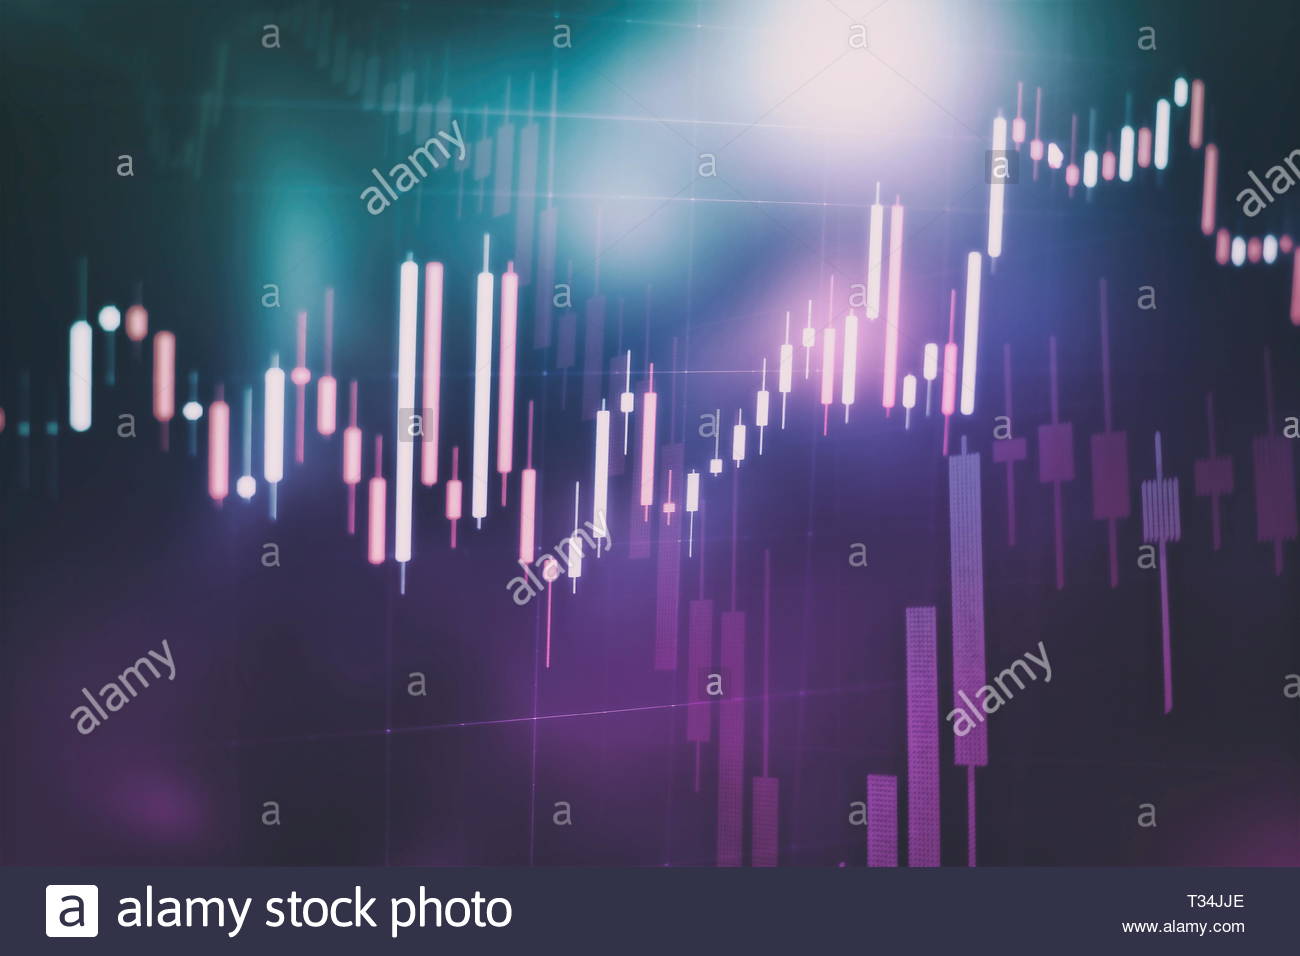 Abstract Glowing Forex Chart Interface Wallpaper Investment